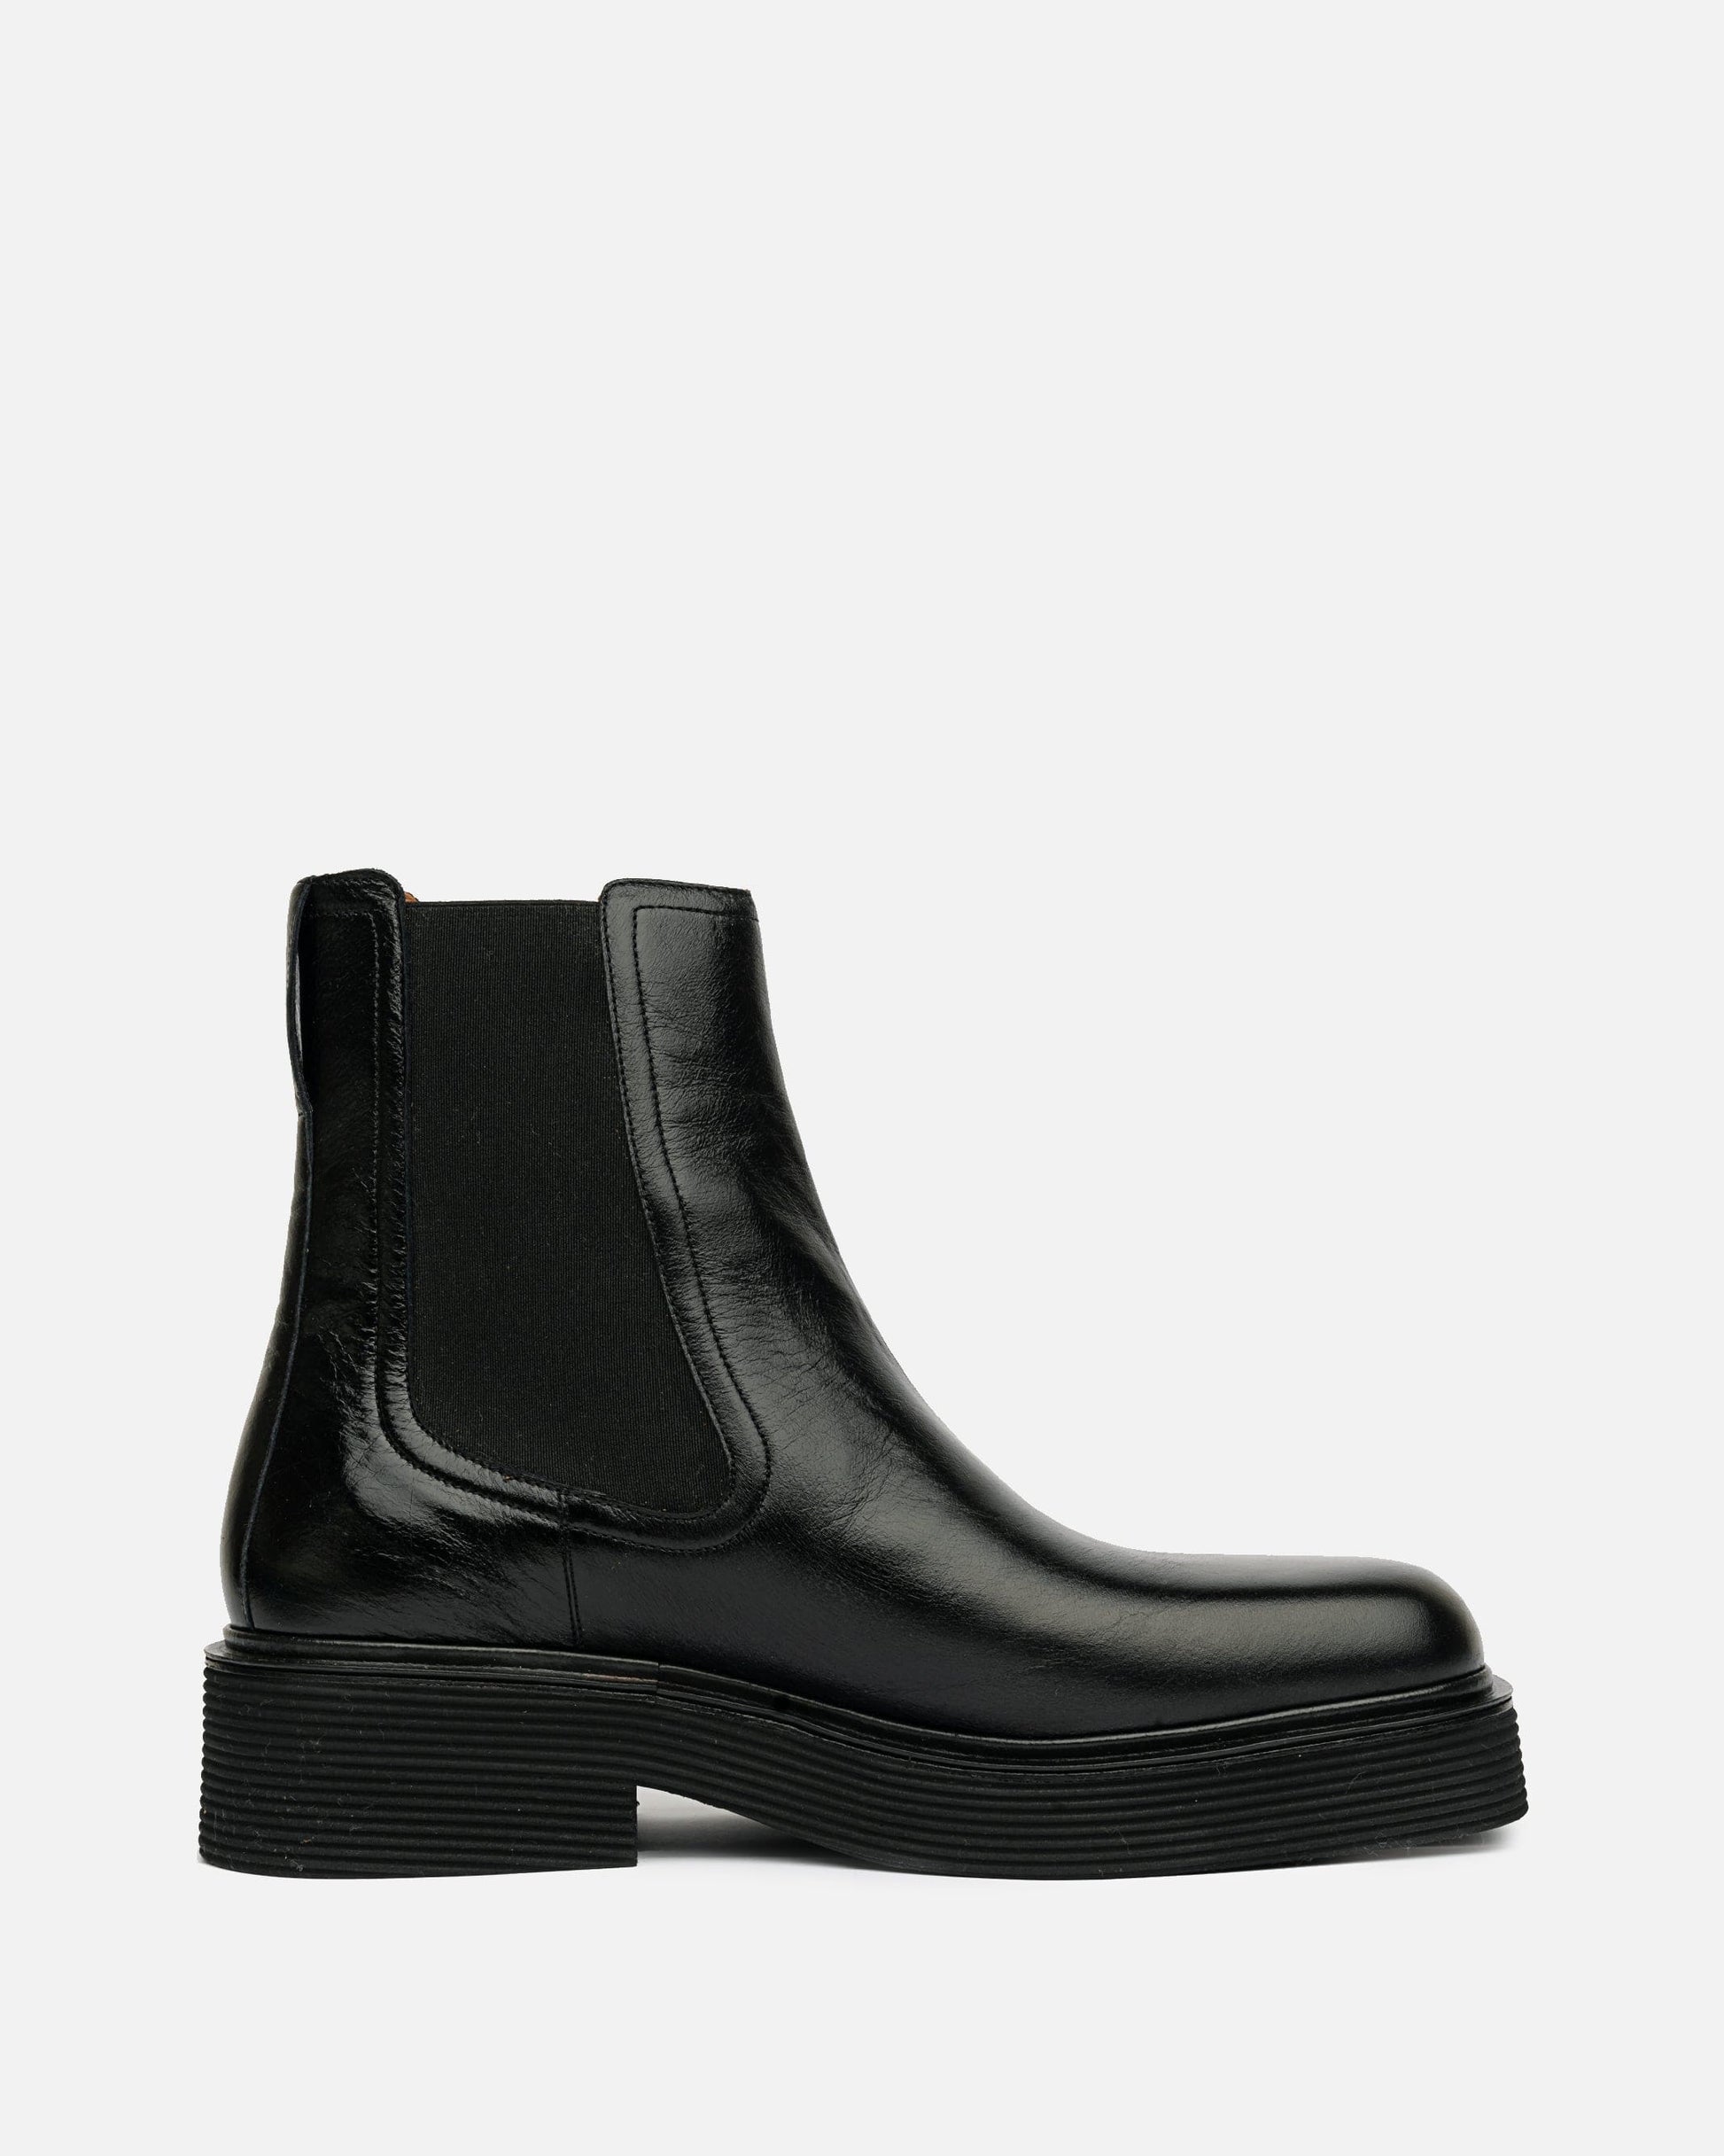 Marni Men's Boots Shiny Leather Chelsea Boot in Black